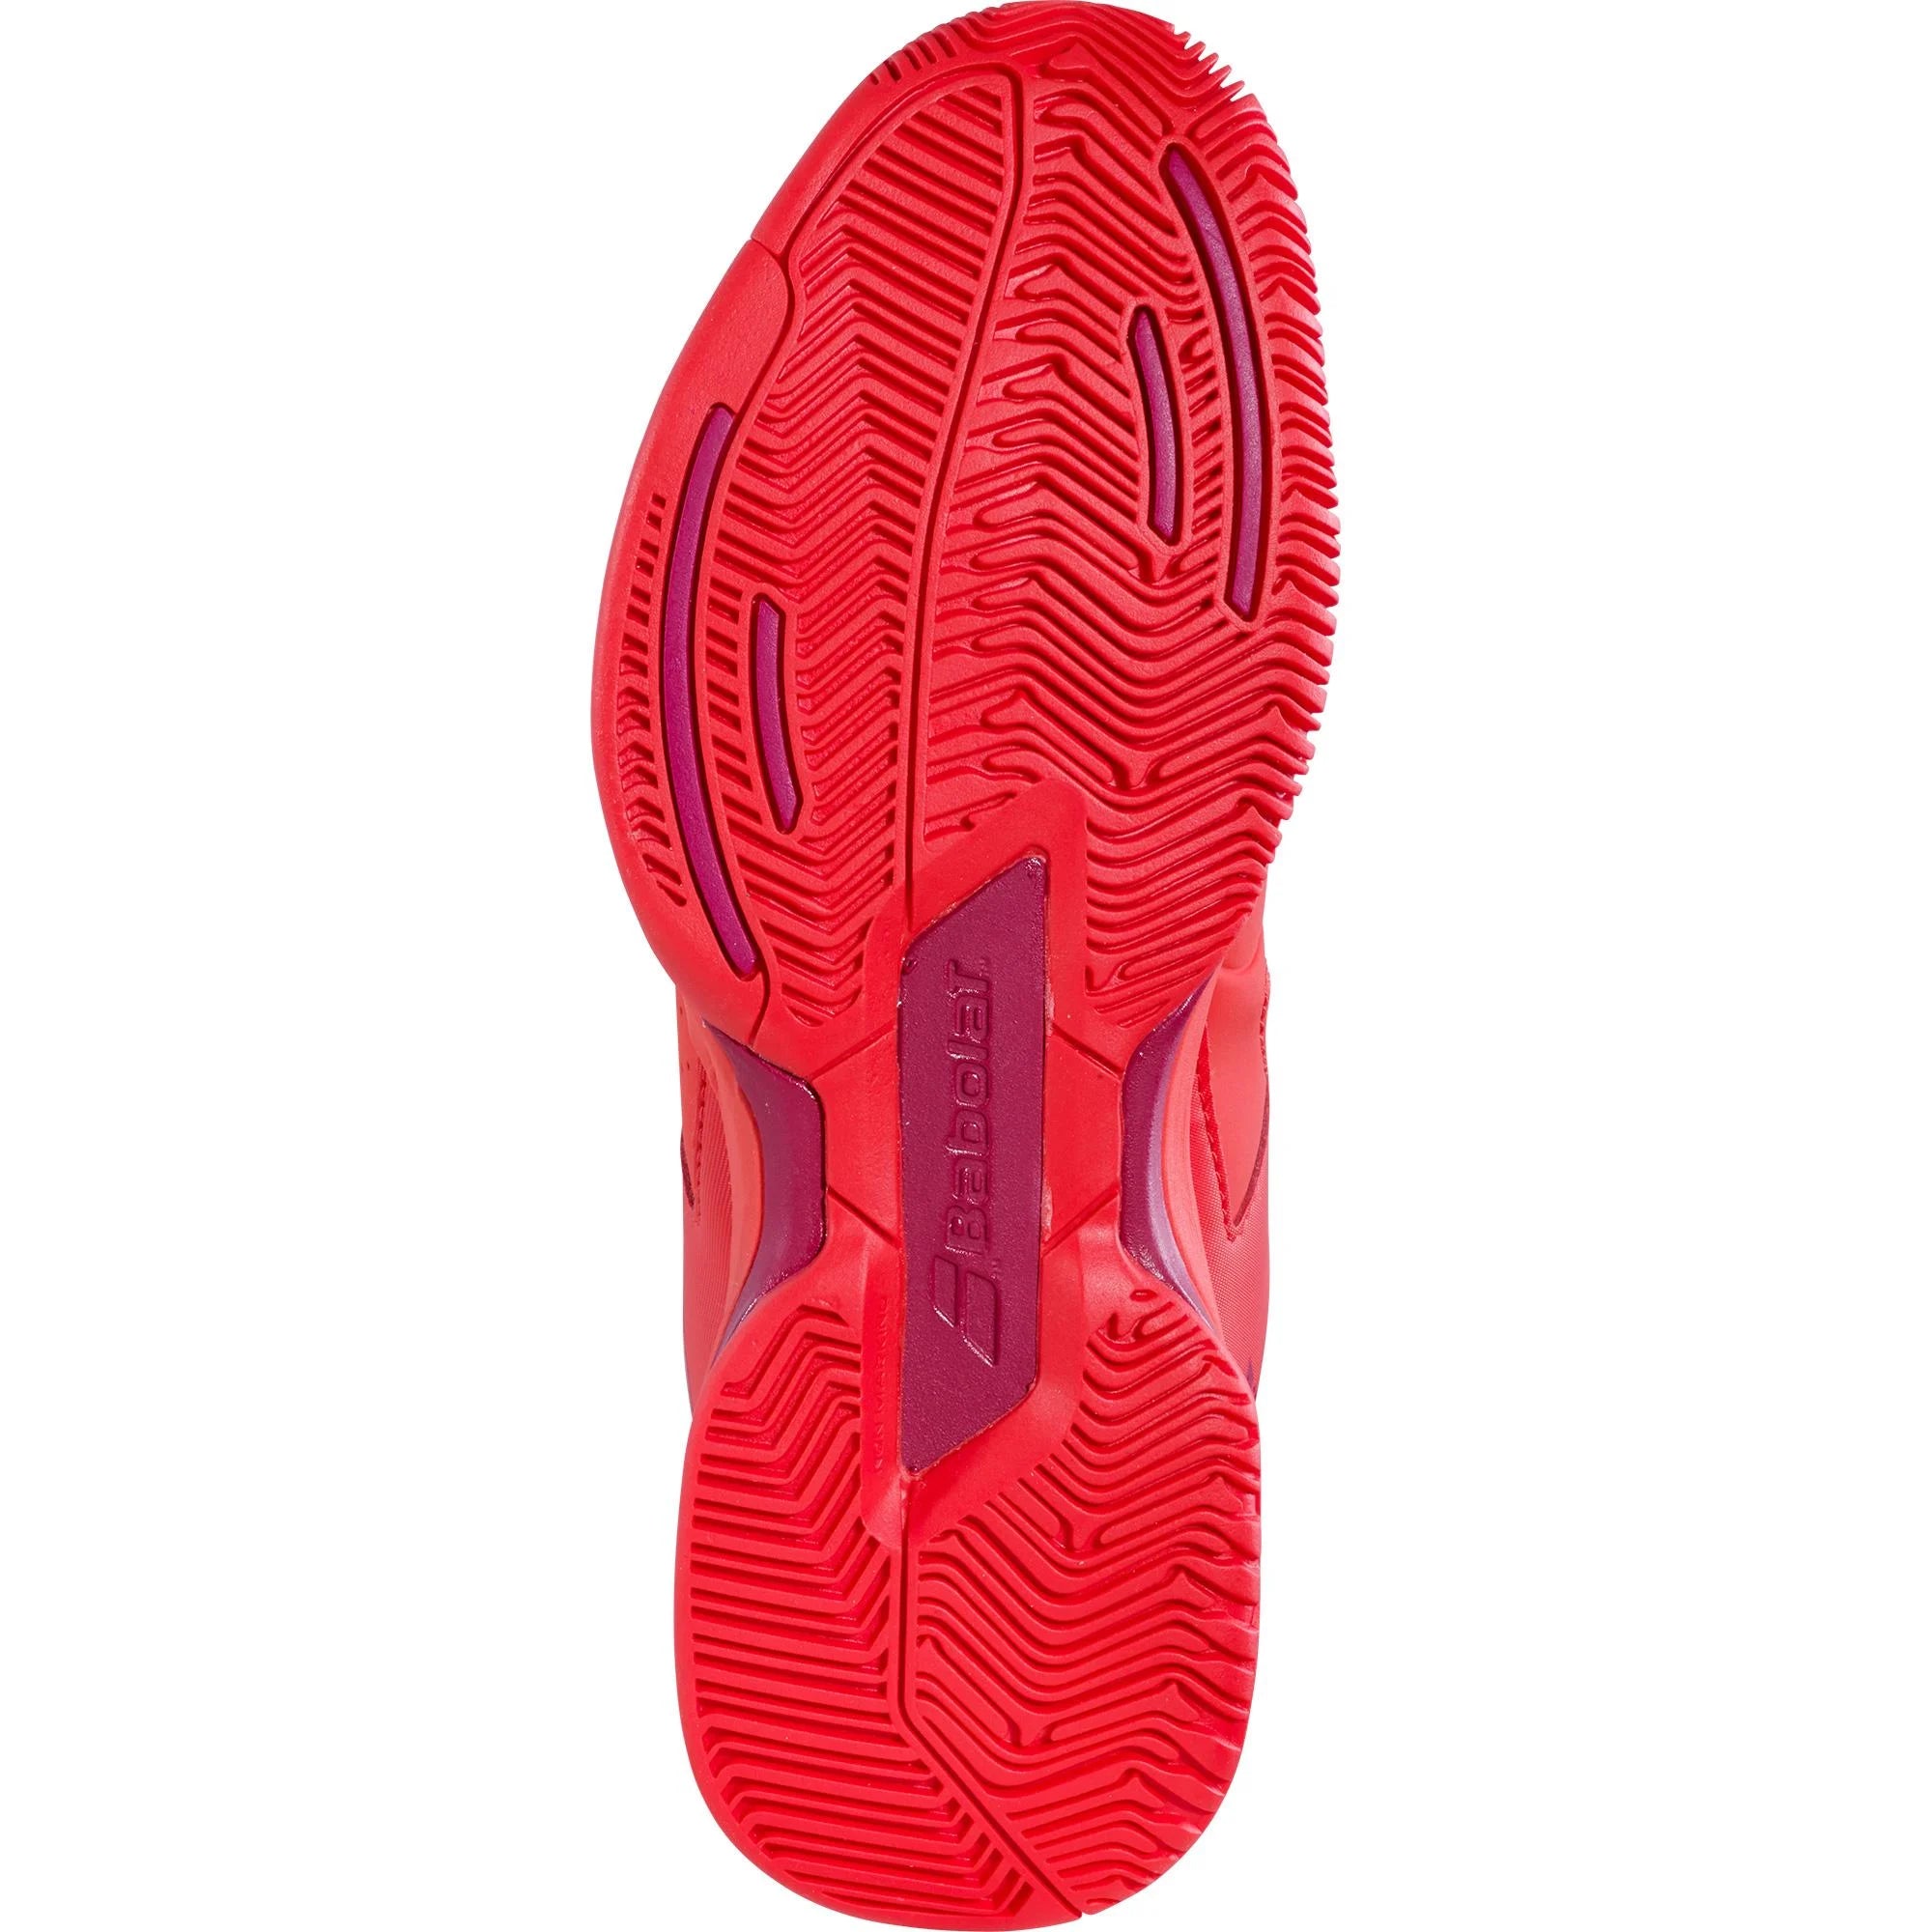 Babolat Pulsion All Court Women Tennis Shoes - Cherry Tomato